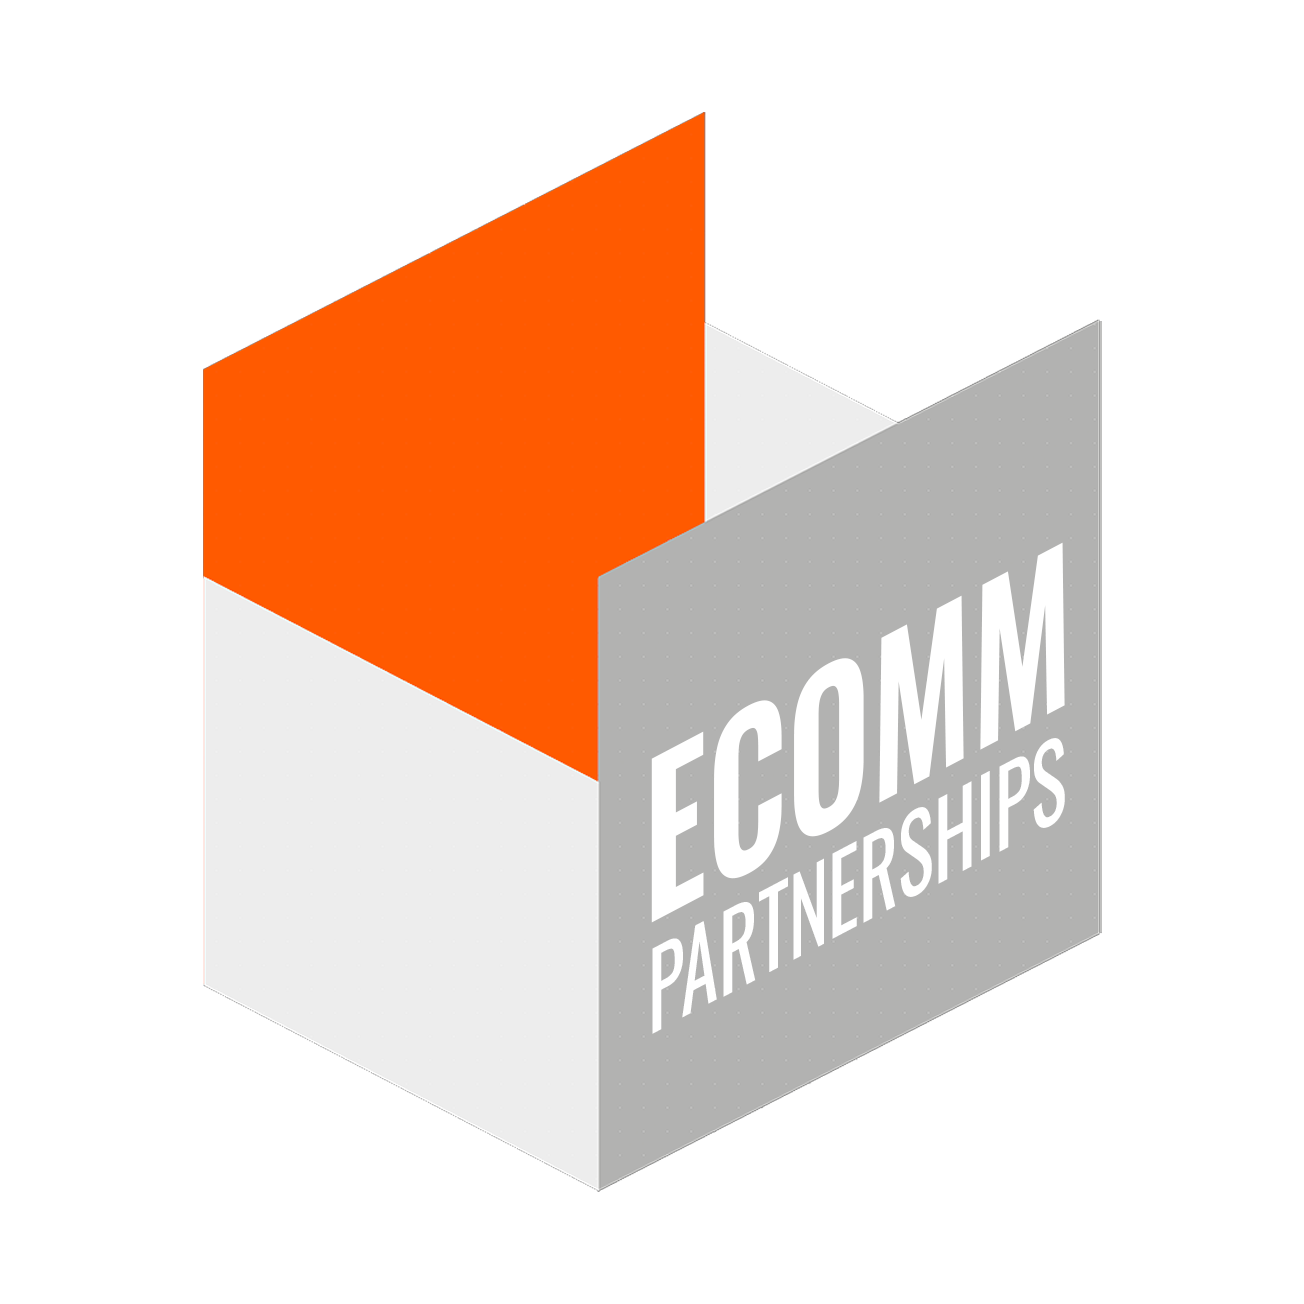 eComm Partnerships: Online Business Success Easy As 1, 2, 3